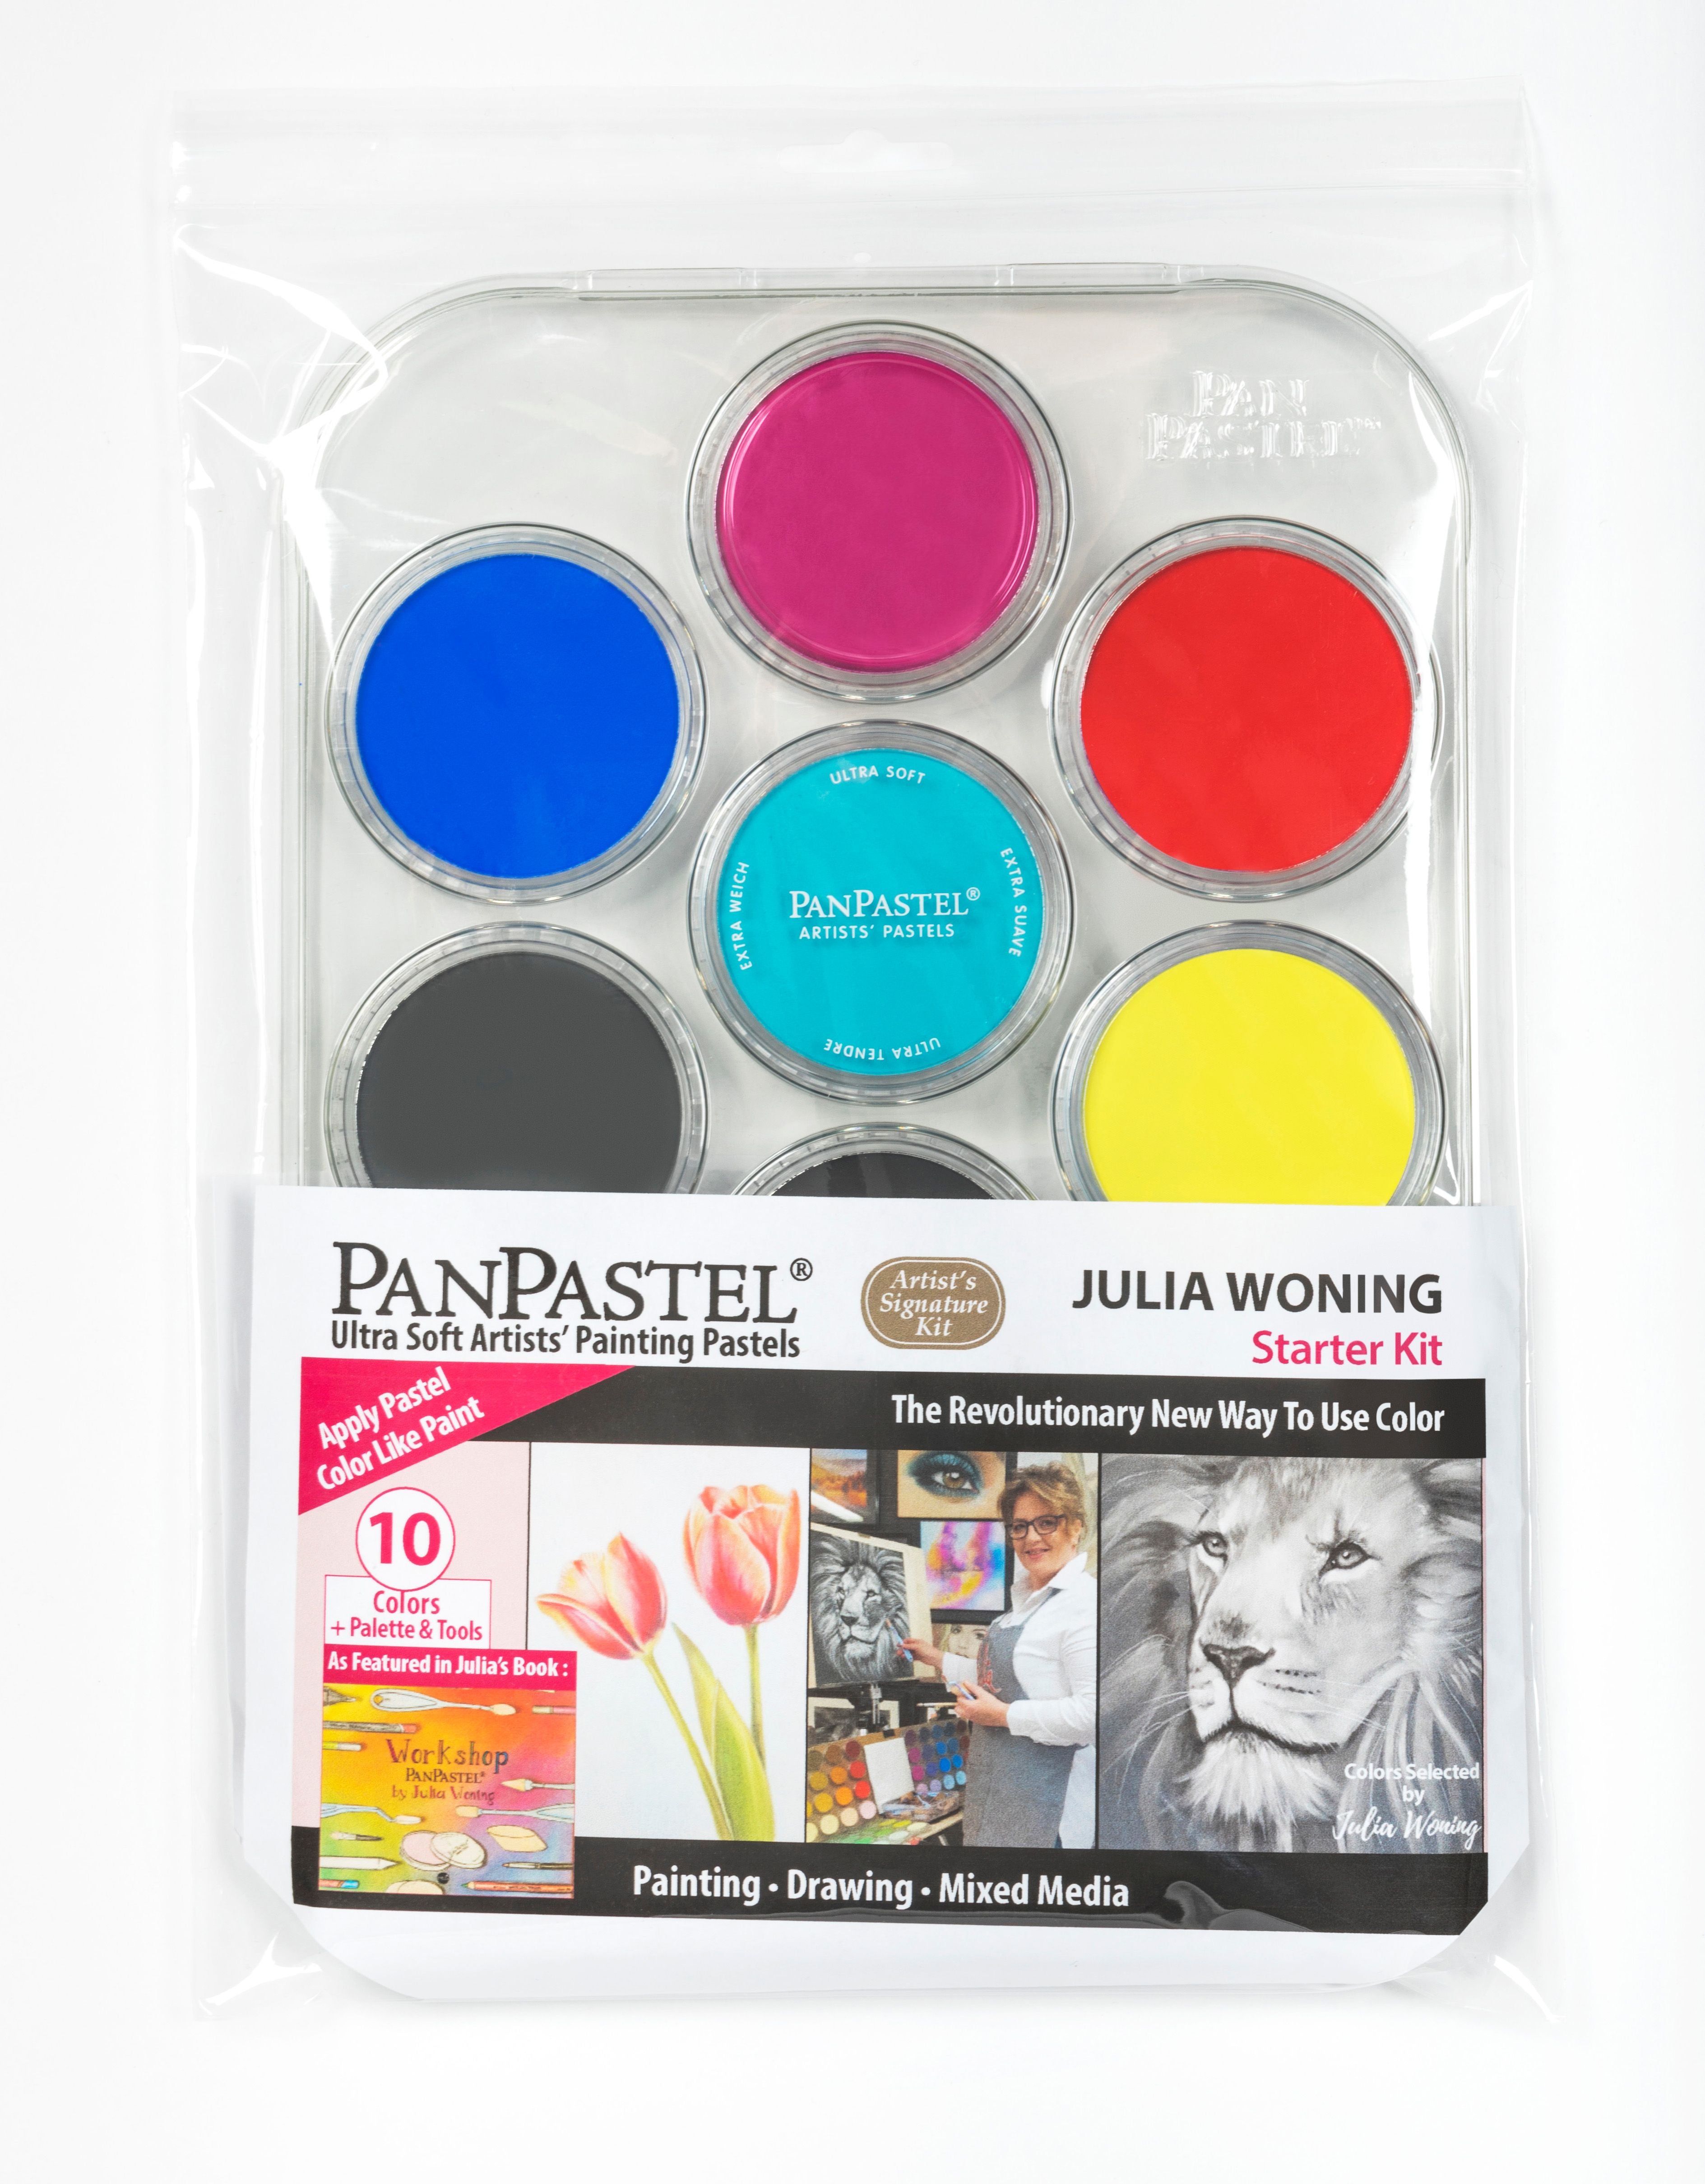 The Julia Woning PanPastel Set includes 10 PanPastel colours selected by Julia, a 10 slot palette tray, 2 Sofft Knives with covers, a finger sponge an angle slice round sponge.  It represents excellent value as you receive the Palette tray and tools worth over £28 free.